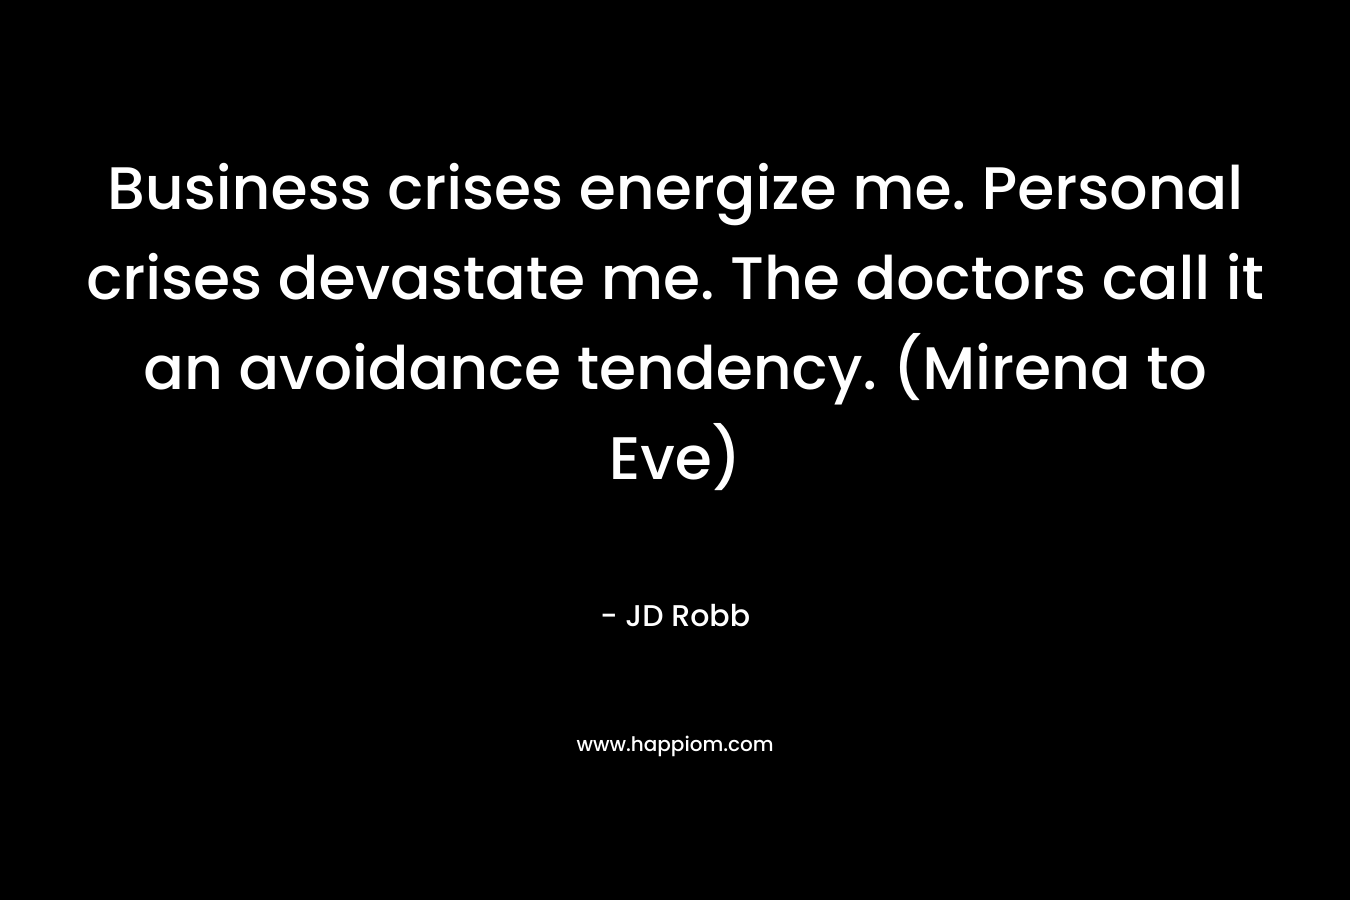 Business crises energize me. Personal crises devastate me. The doctors call it an avoidance tendency. (Mirena to Eve)